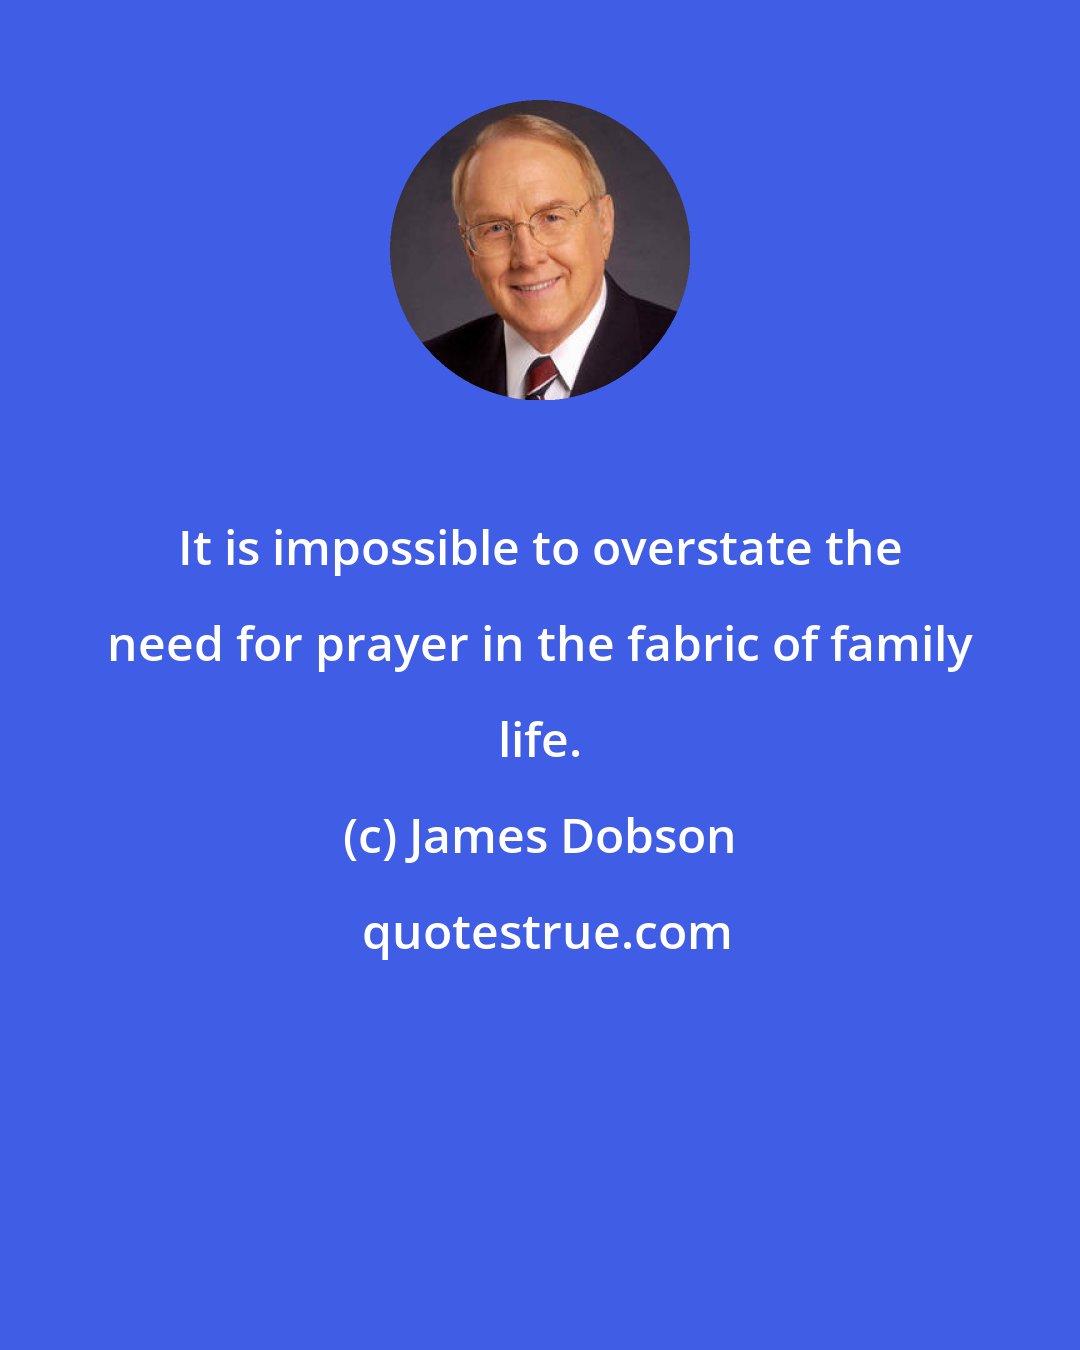 James Dobson: It is impossible to overstate the need for prayer in the fabric of family life.